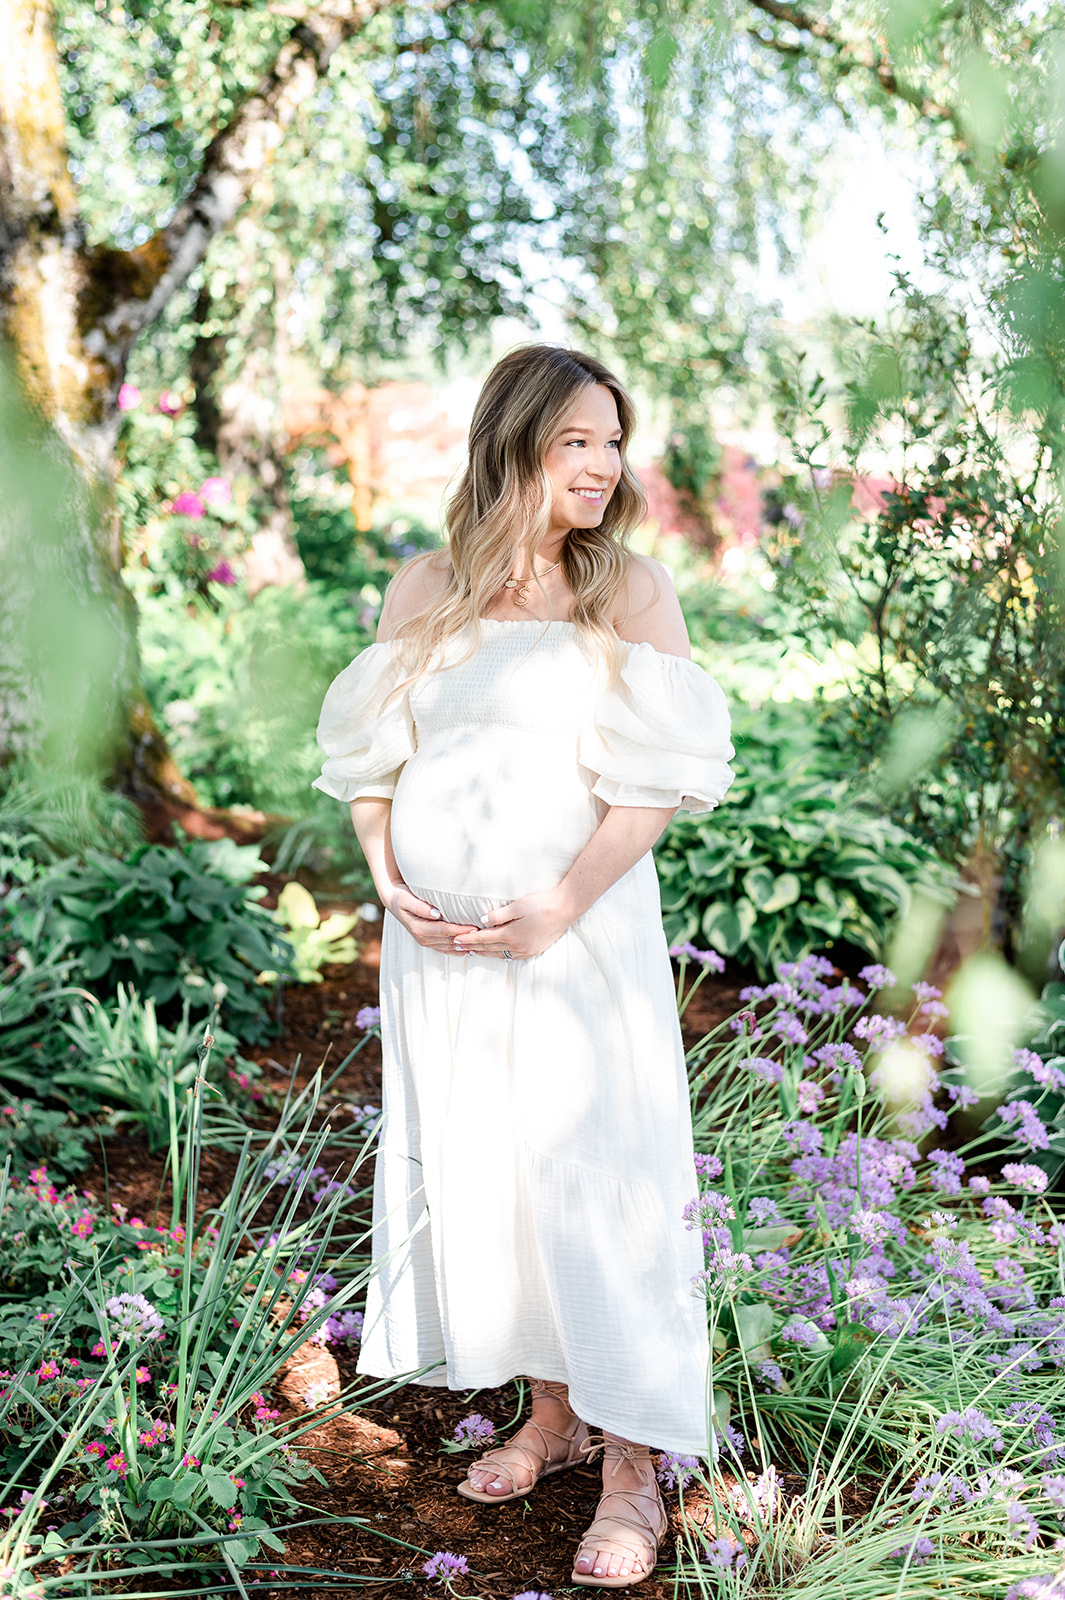 mother-to-be holding her baby bump, surrounded by lush greenery at Adelman Peony Gardens
 